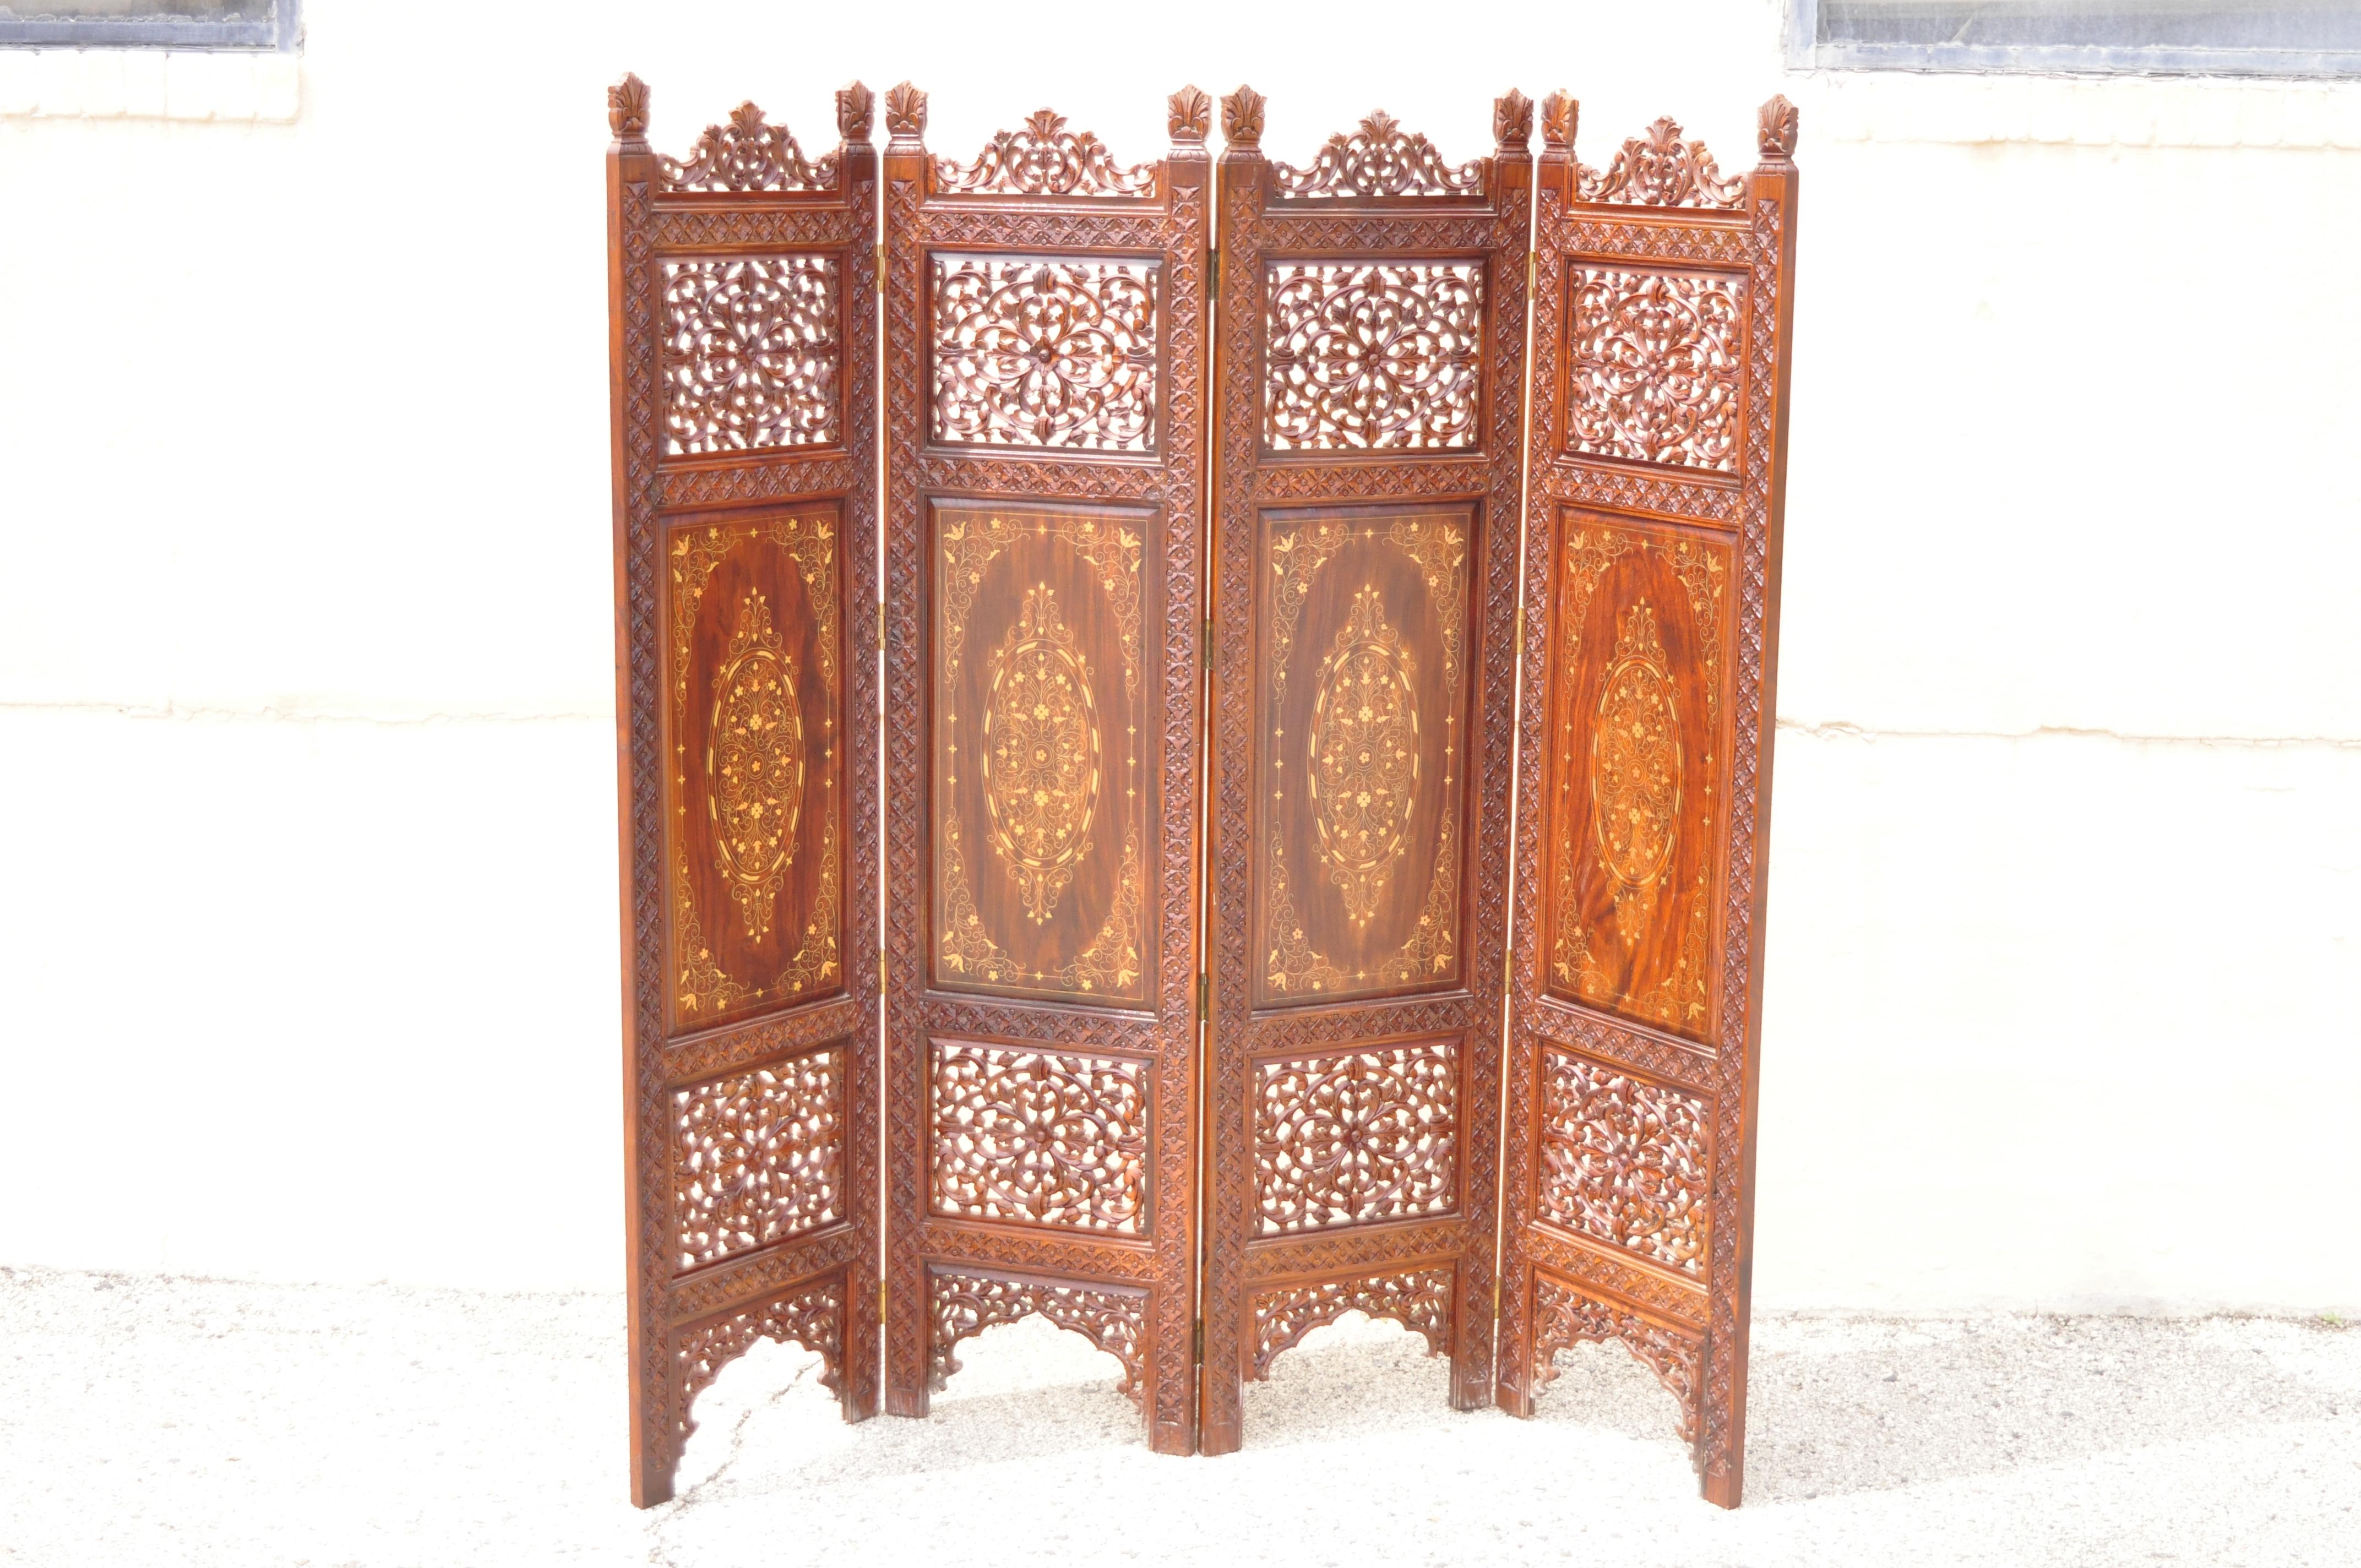 Vintage Anglo-Indian teak wood brass inlay 4 panel room divider folding screen. Item features ornate brass inlay, 4 folding panels, nicely carved details, very nice vintage item, great style and form. Circa mid to late 20th century. Measurements: